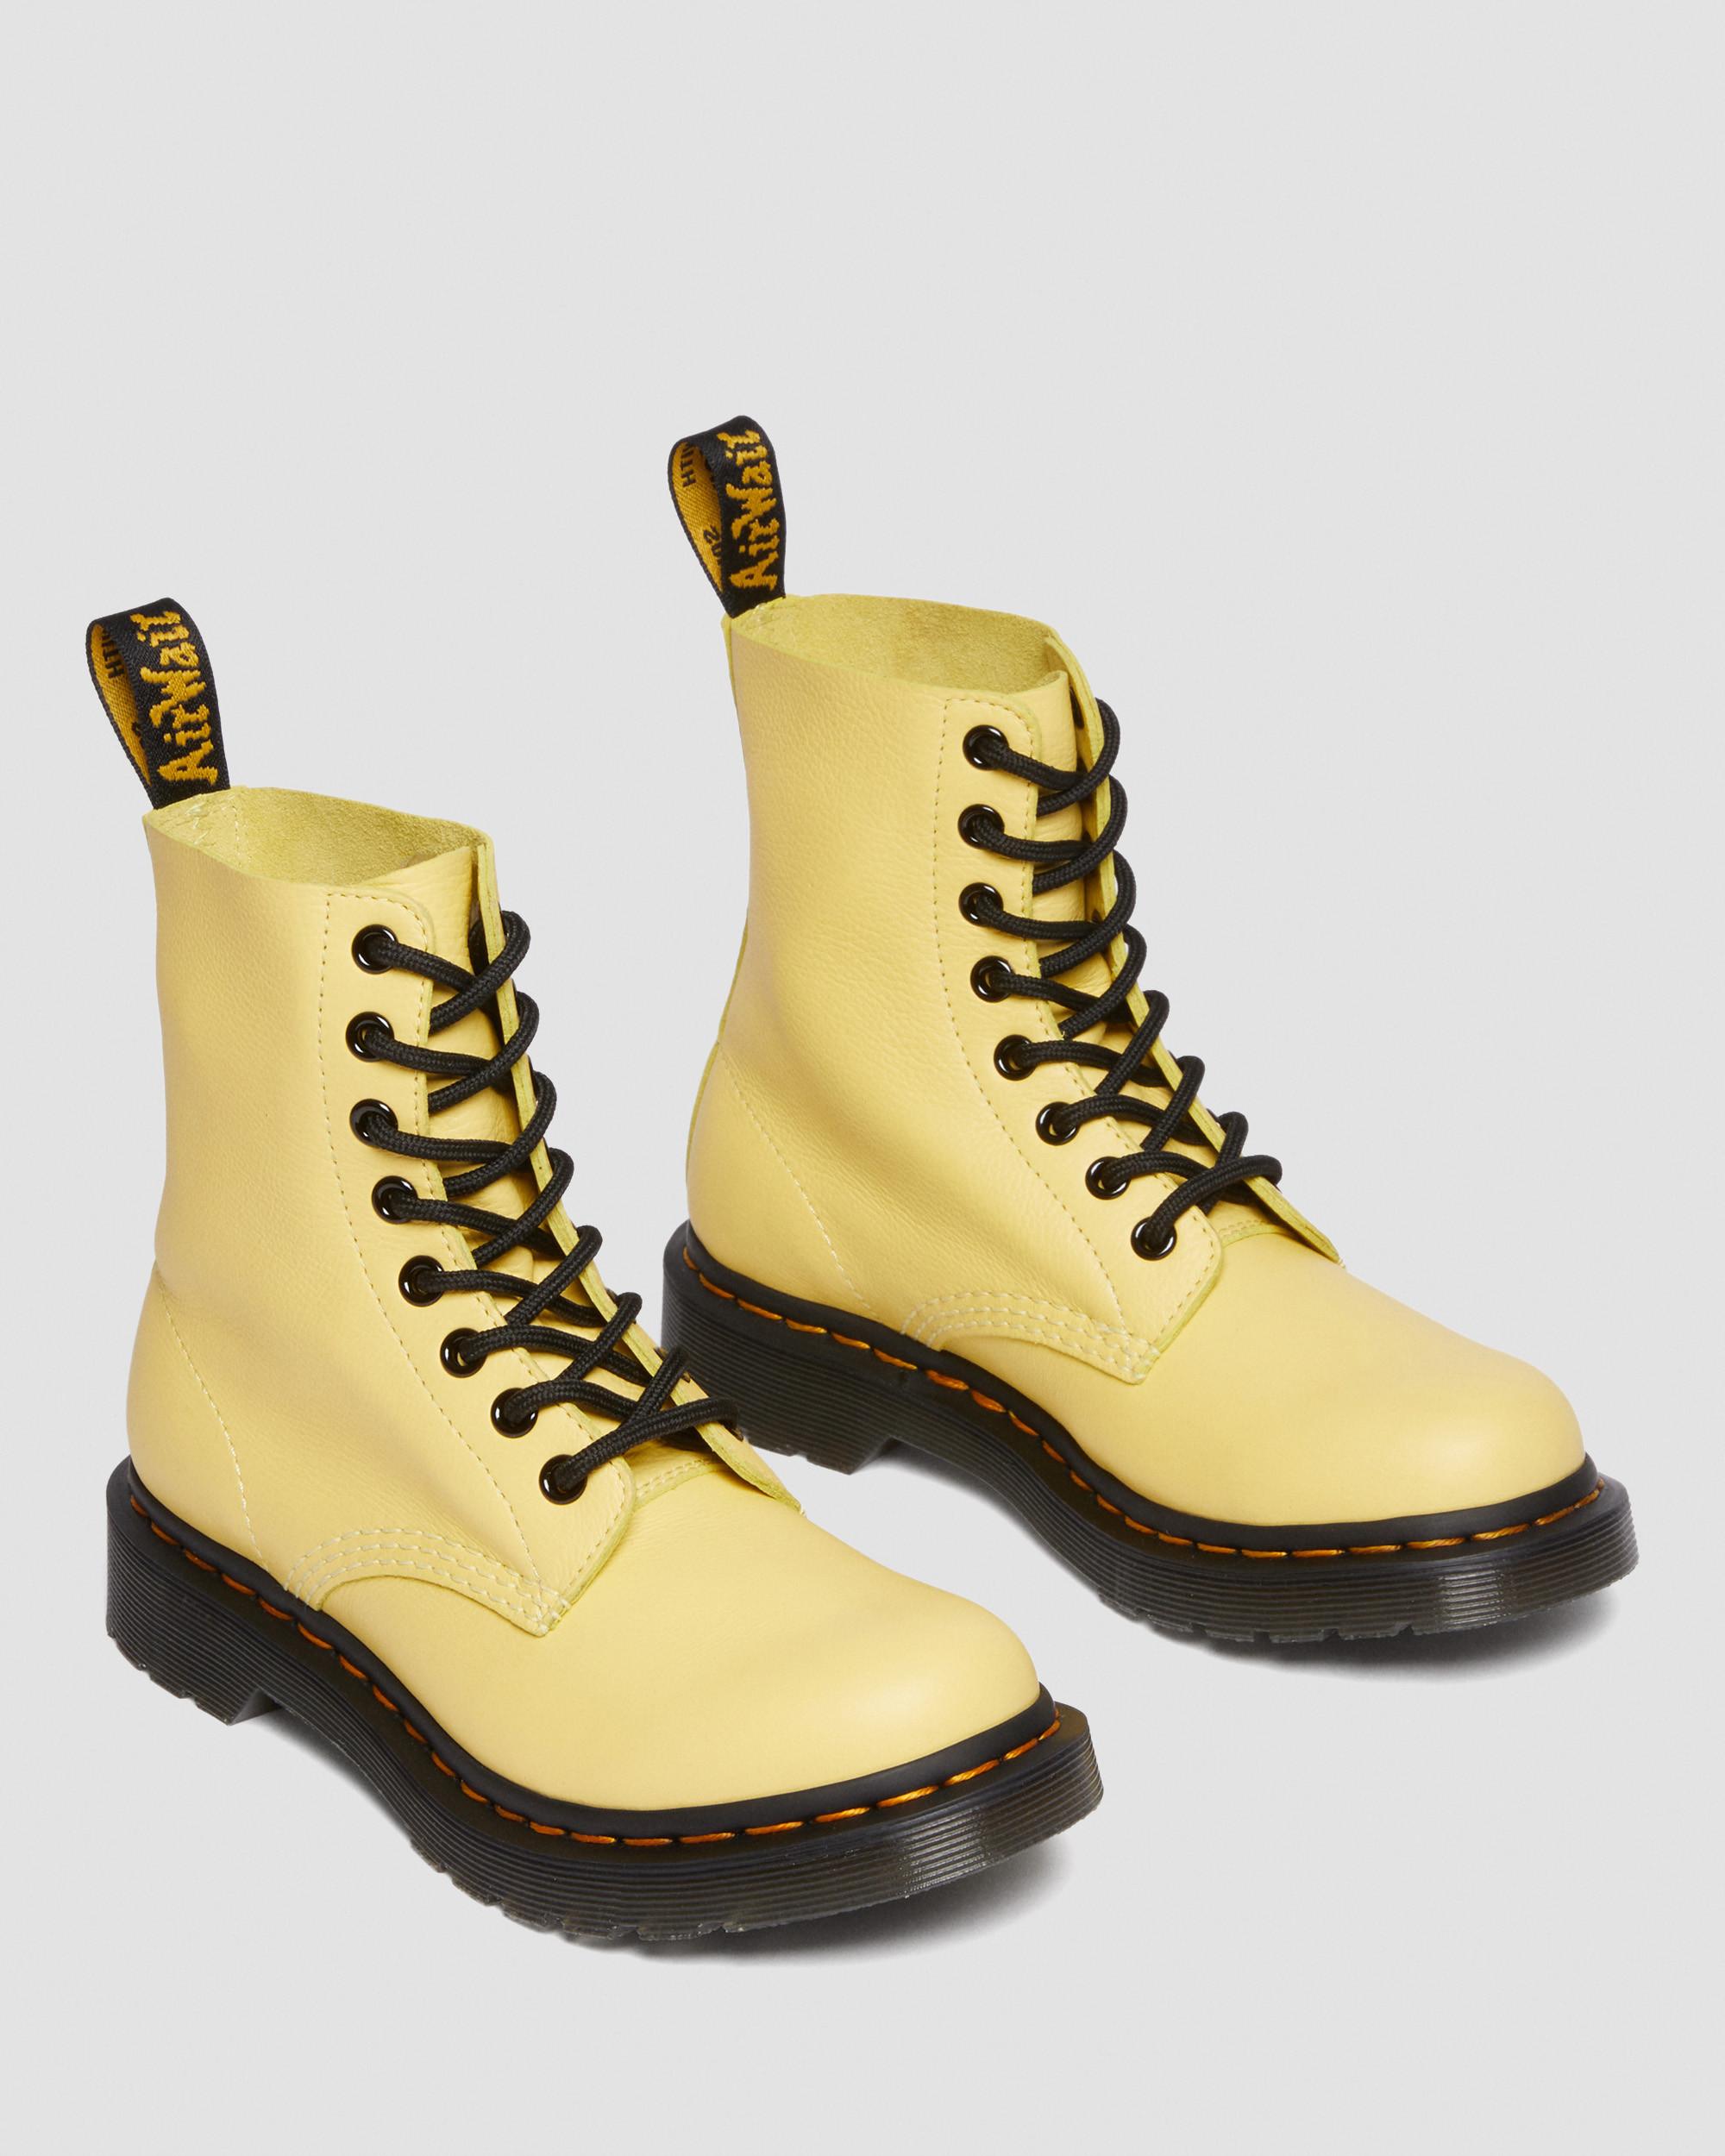 1460 Women's Pascal Black Eyelet Lace Up Boots in Lemon Yellow